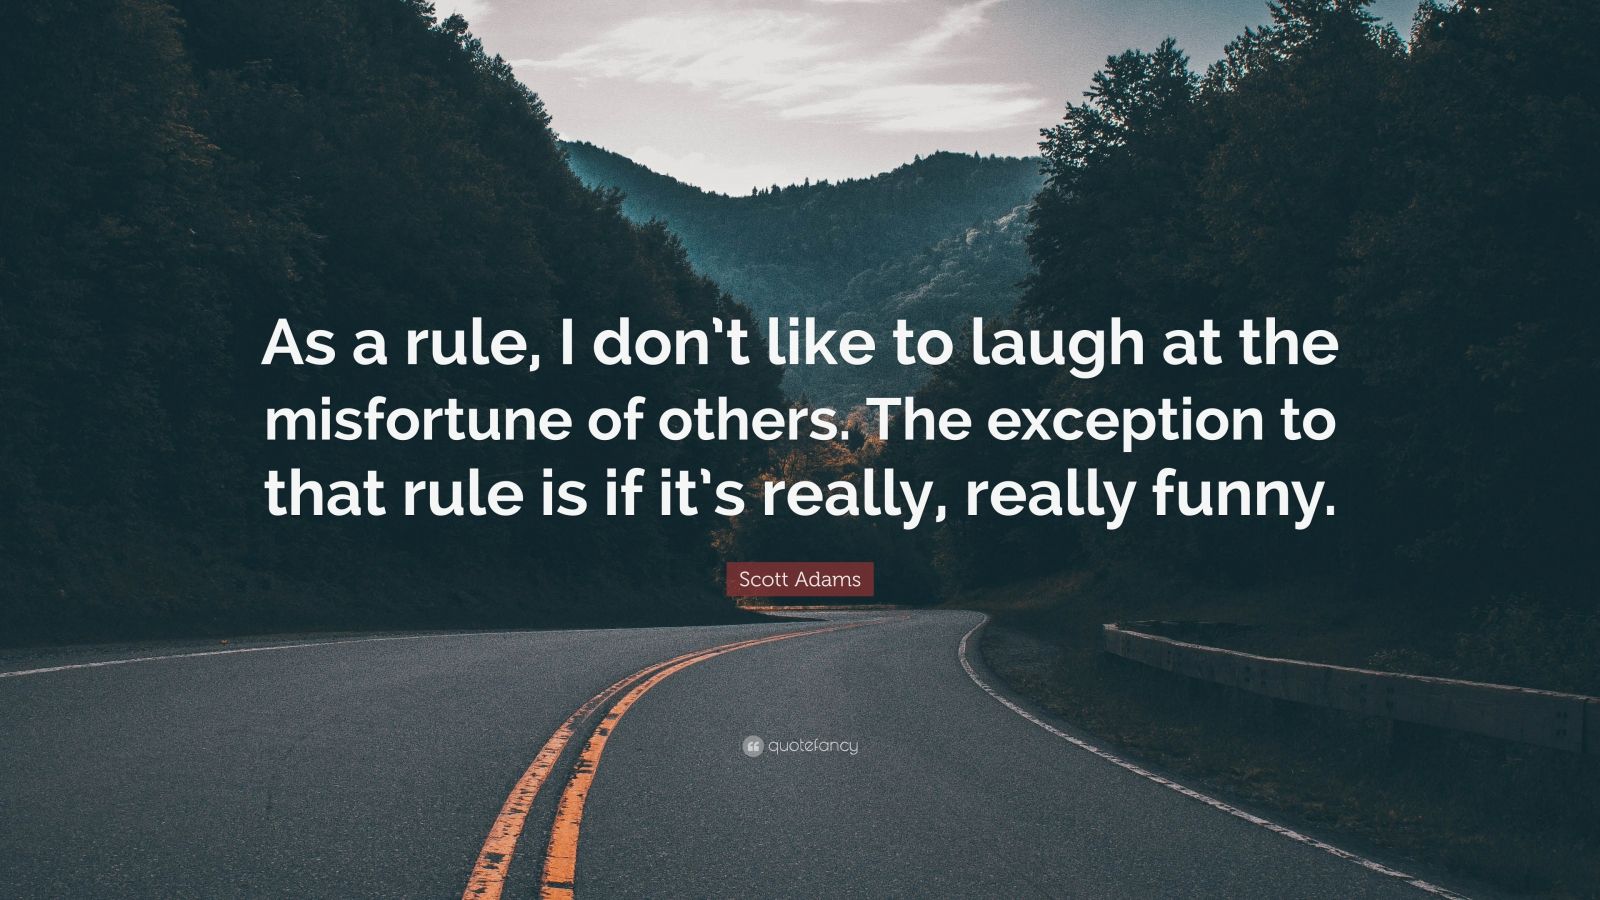 Scott Adams Quote: “As a rule, I don’t like to laugh at the misfortune ...